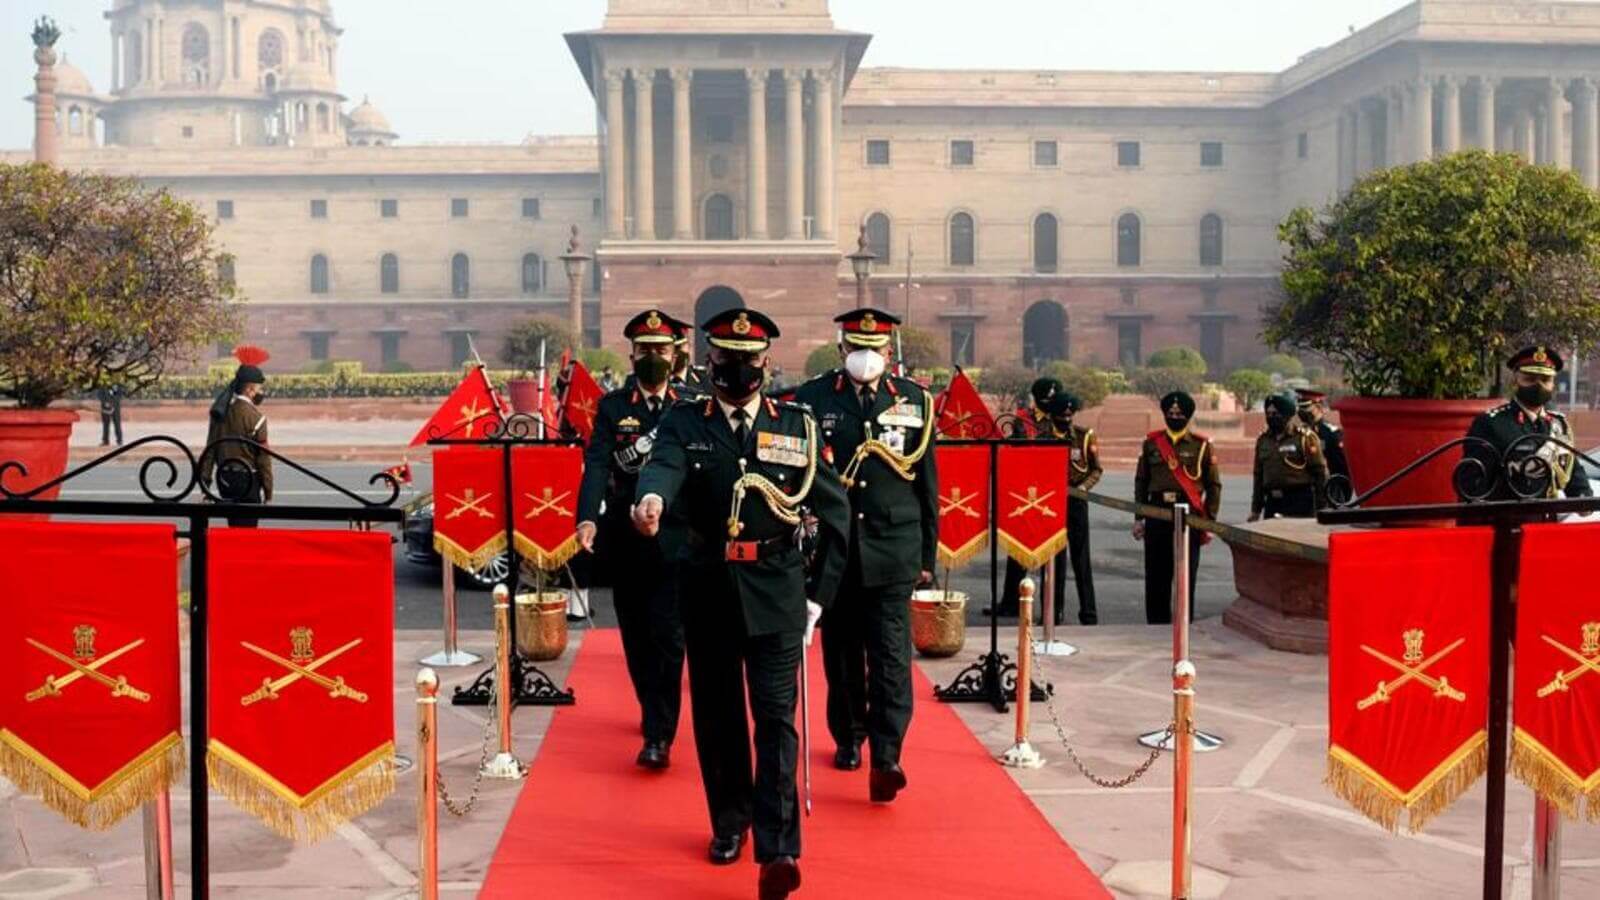 India-China Border Situation “Unpredictable”: Indian Army Chief